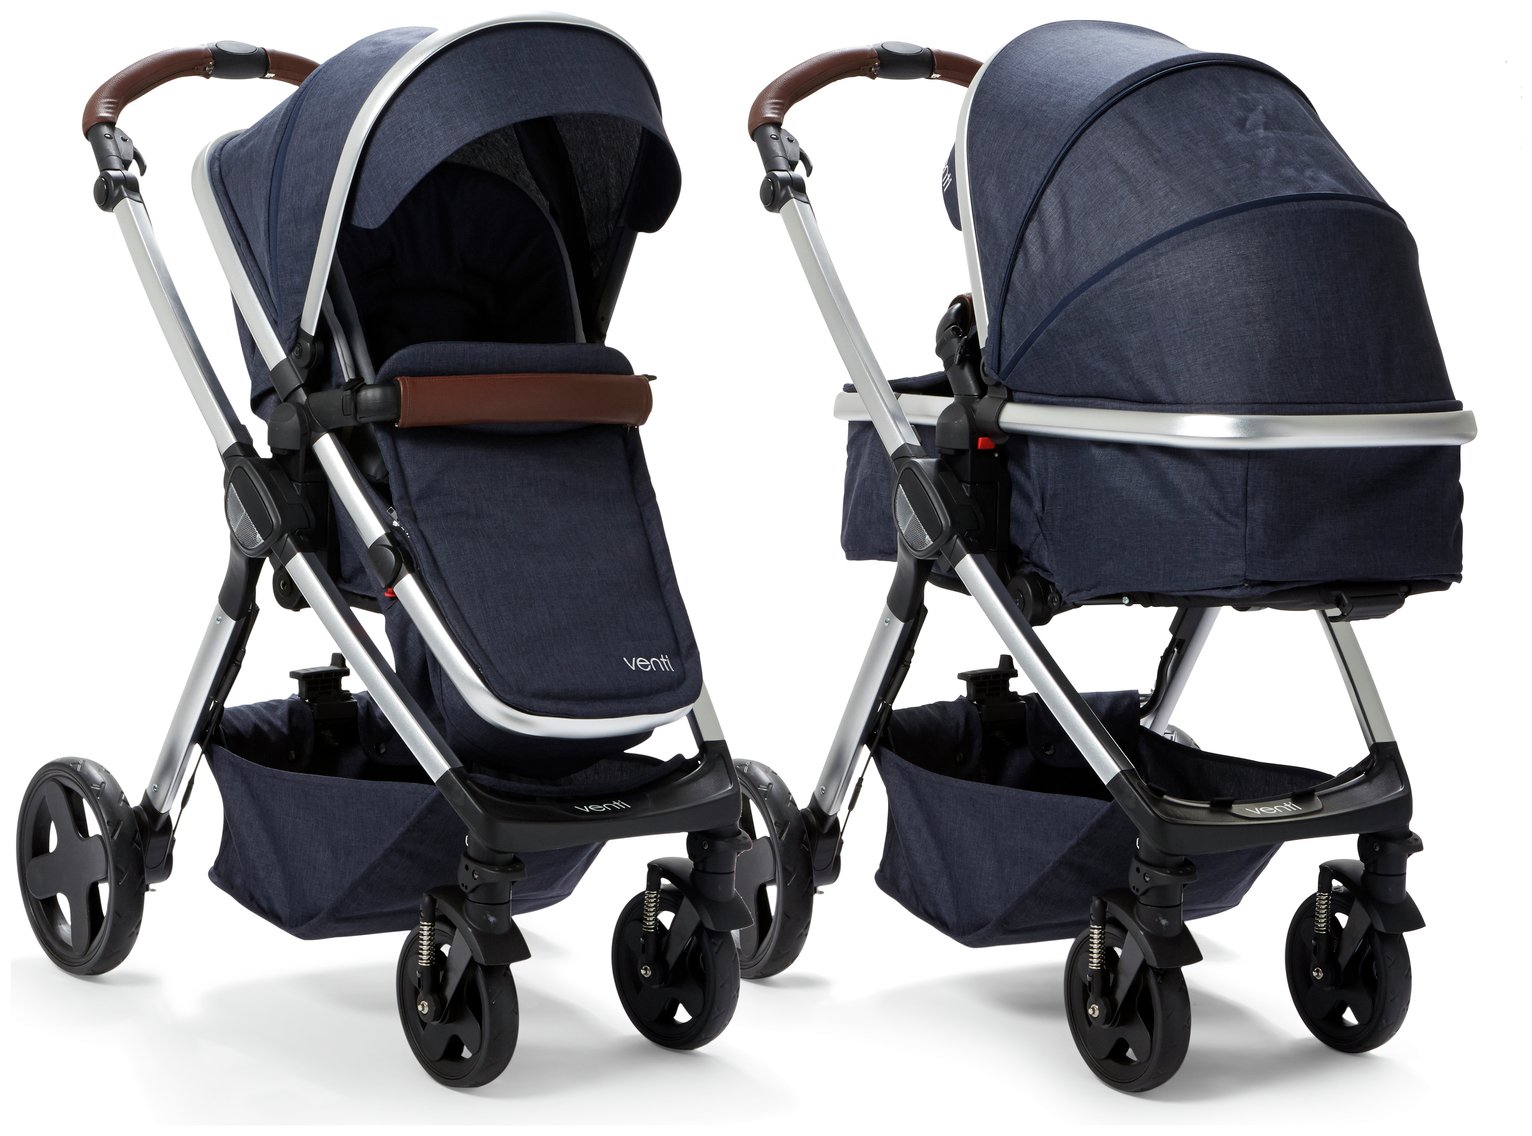 Venti 2 in 1 Pushchair Review